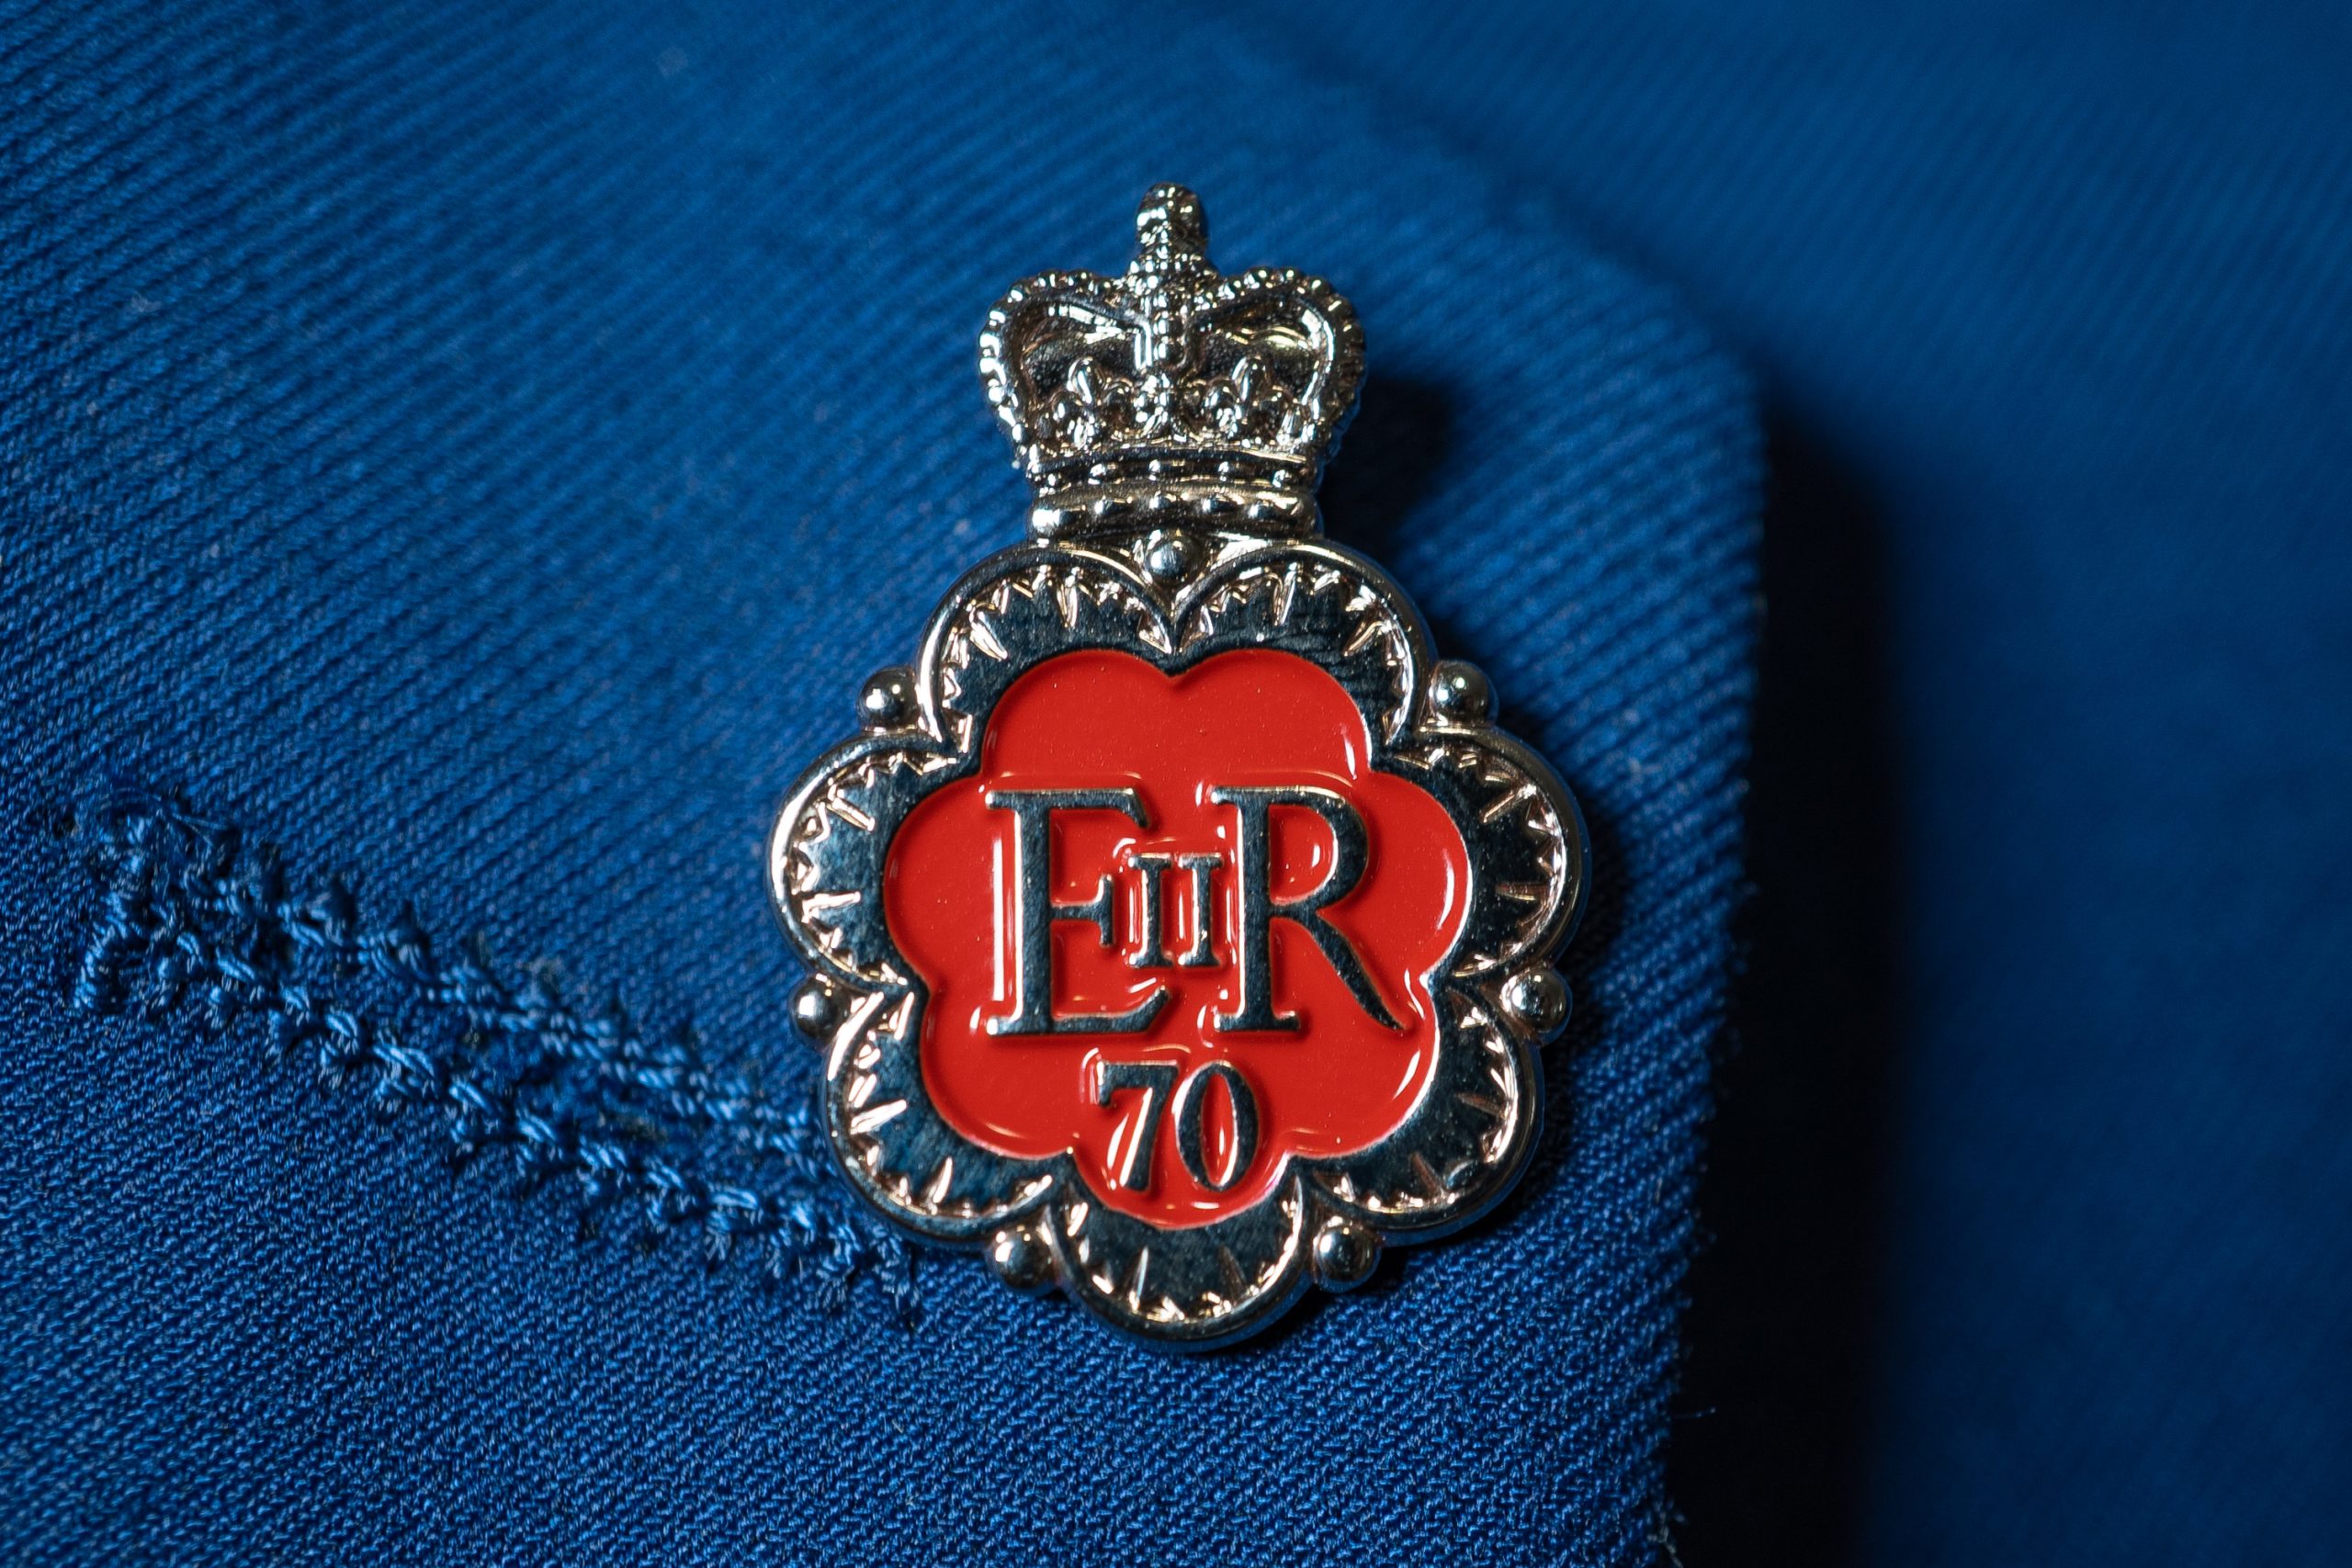 LOCAL RESIDENTS HONOURED WITH QUEEN’S PLATINUM JUBILEE PIN